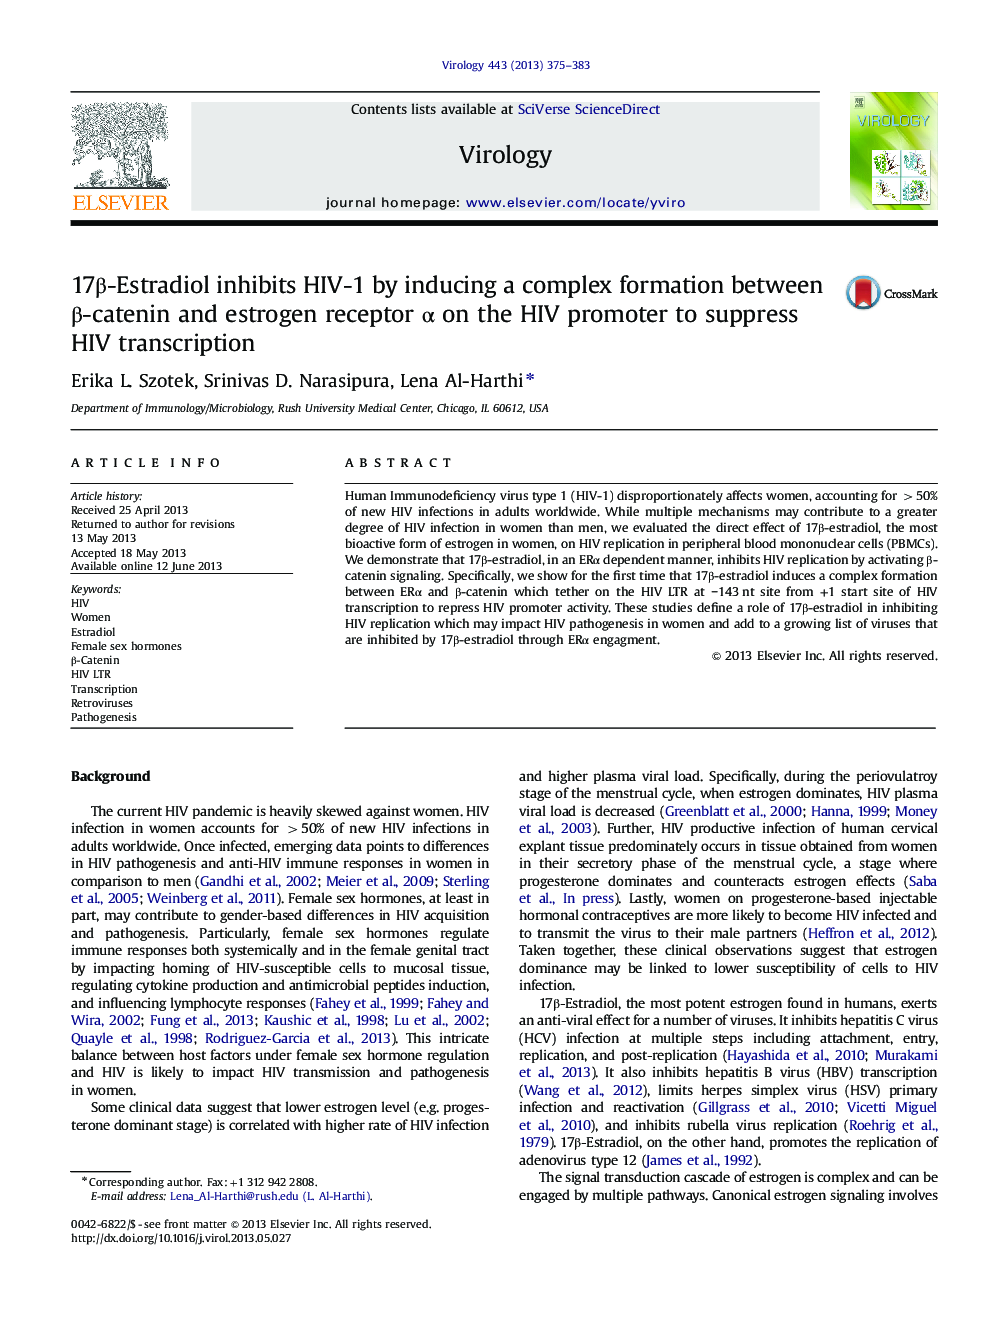 17Î²-Estradiol inhibits HIV-1 by inducing a complex formation between Î²-catenin and estrogen receptor Î± on the HIV promoter to suppress HIV transcription